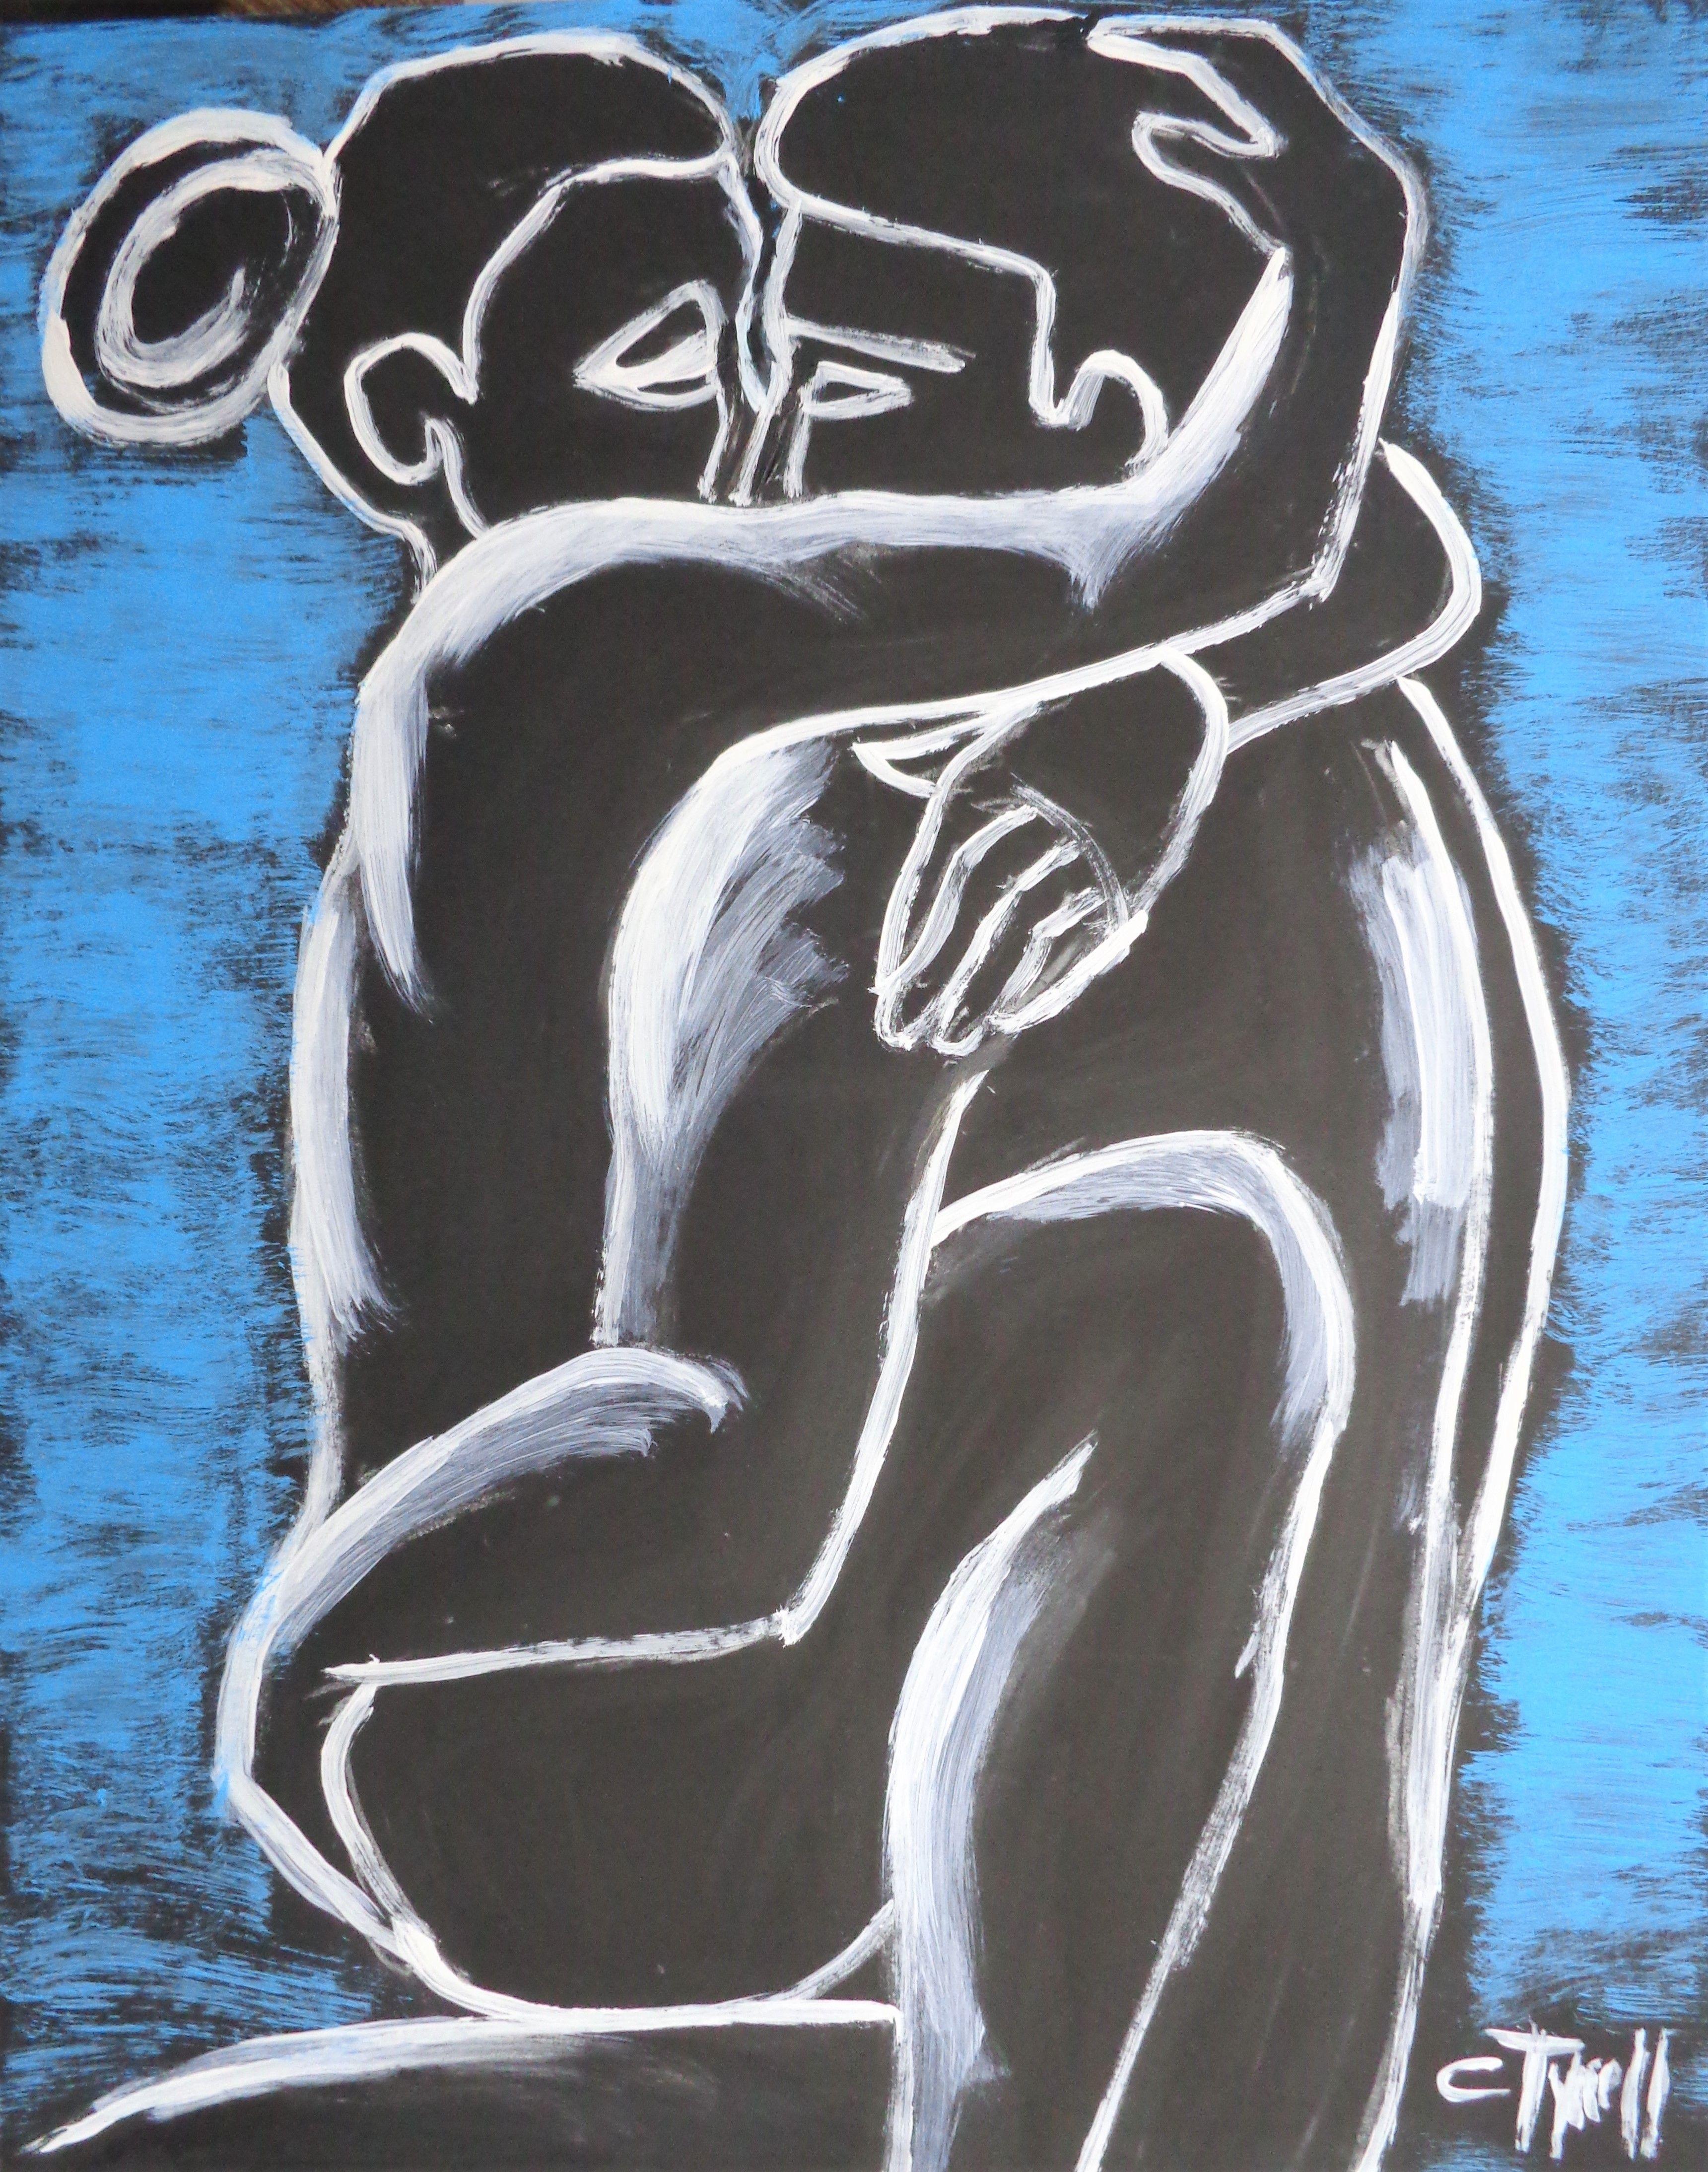 Original semi-abstract figurative painting on black cartridge, unframed. Spontaneous artwork made using blue and white acrylics. Emotional and sensual image of an embraced couple in love, part of a new series. Size 51 cm x 63 cm (20" x 25"). Quality